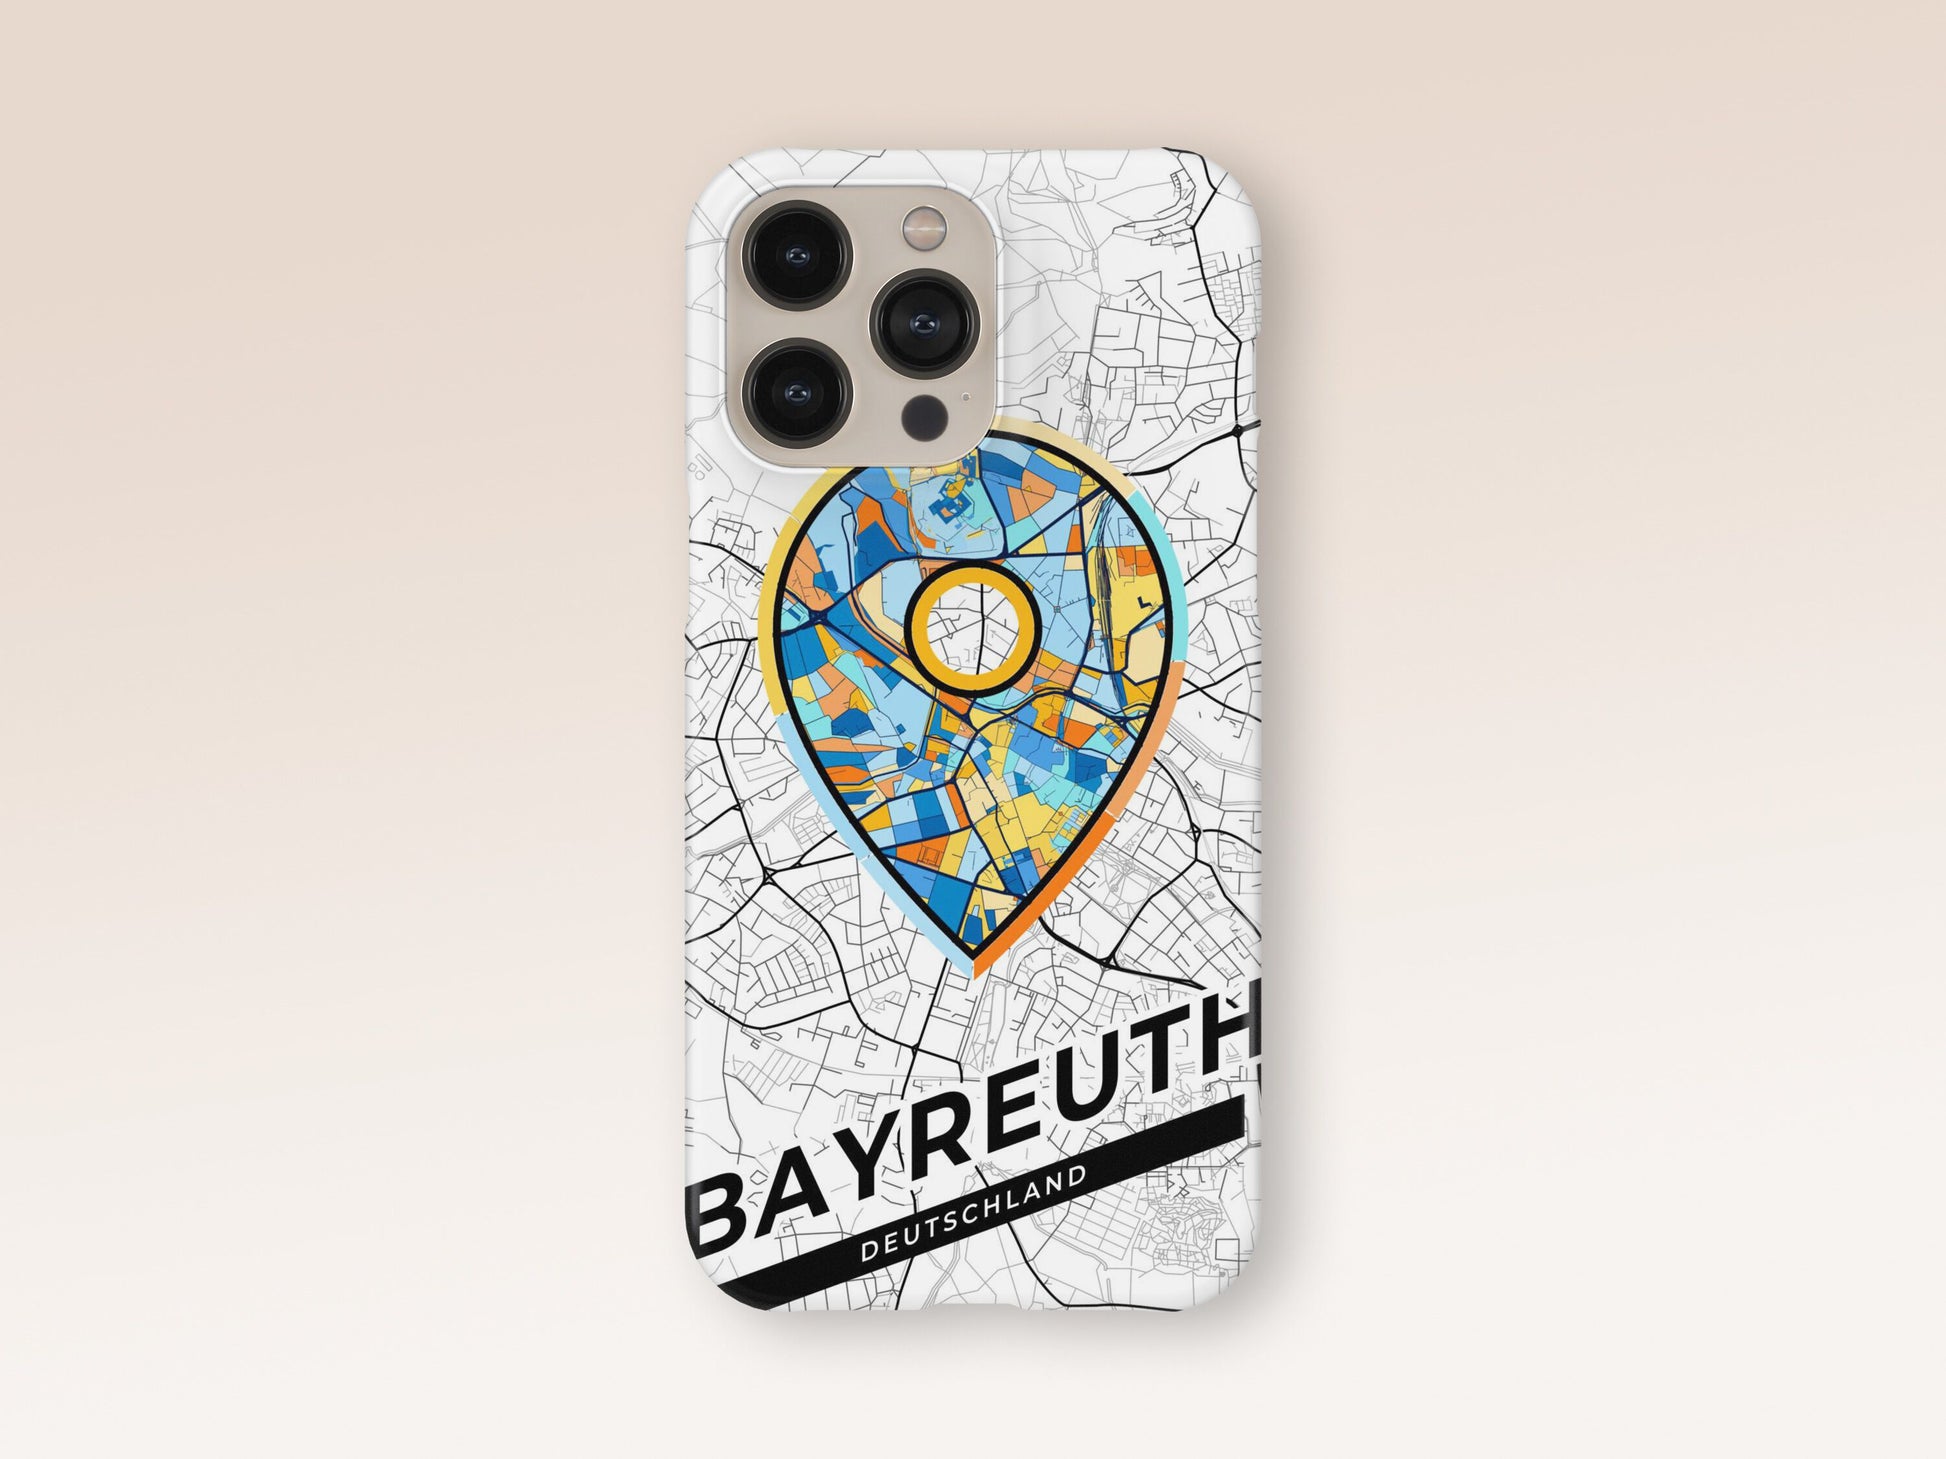 Bayreuth Deutschland slim phone case with colorful icon. Birthday, wedding or housewarming gift. Couple match cases. 1